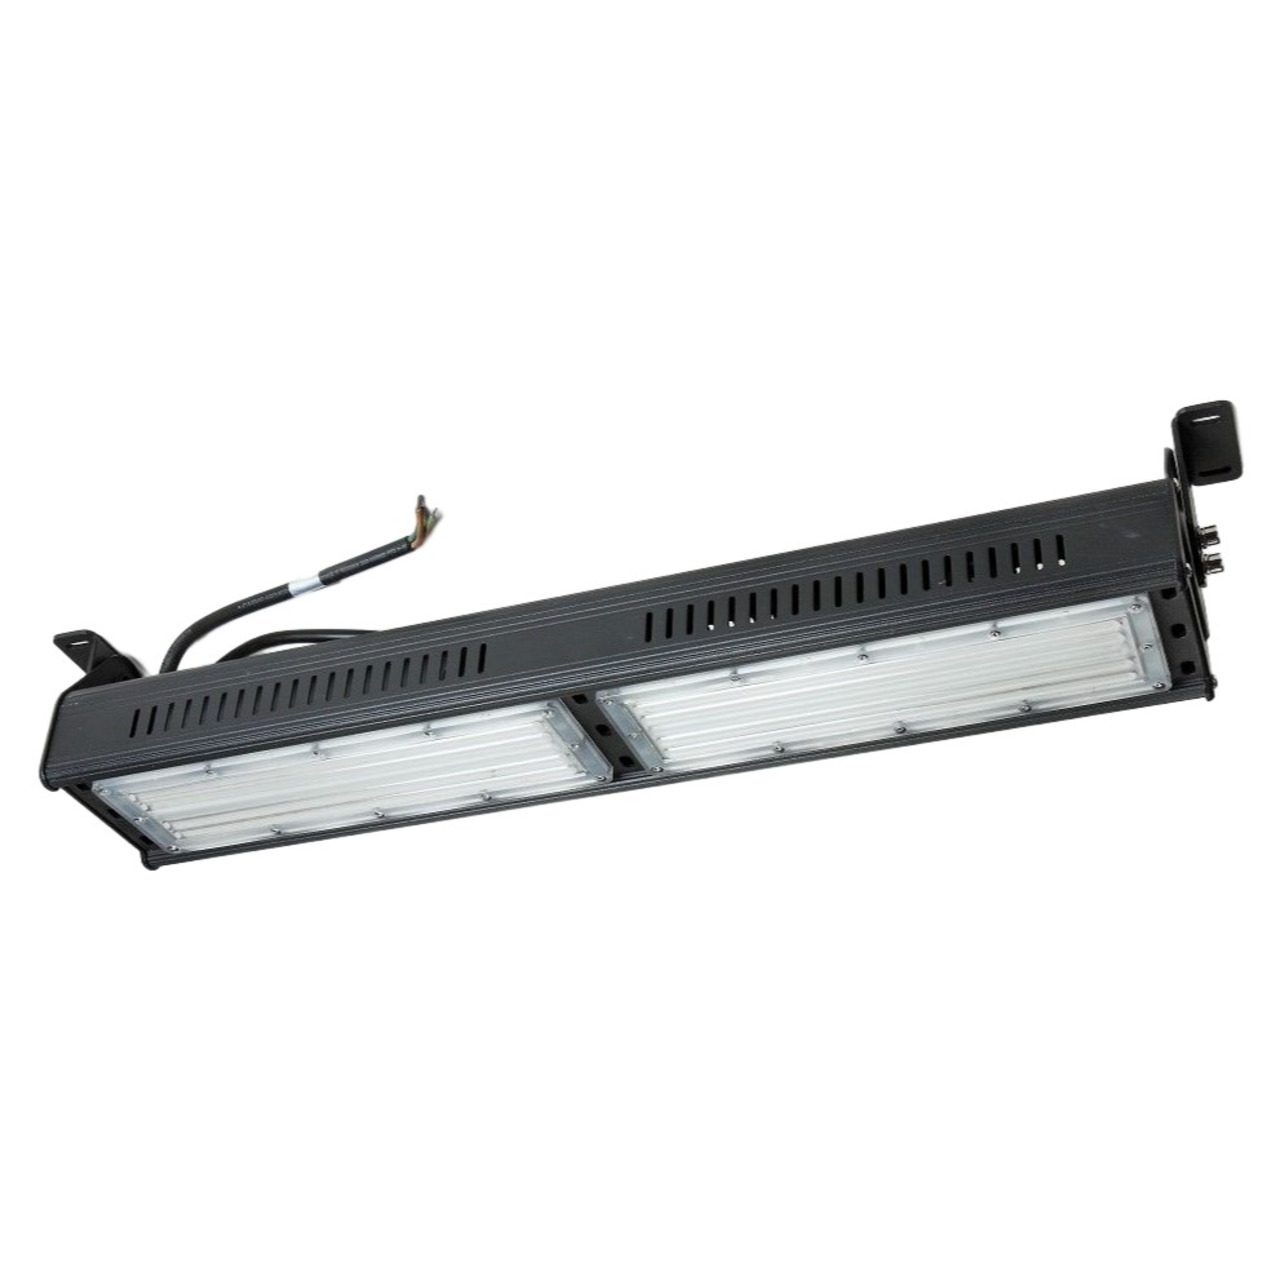 ENOVALITE 100-W-LED-Strahler Linear-HighBay 100- 12000 lm- 120 lm-W- 5000 K- neutralweiss- IP65 unter Beleuchtung